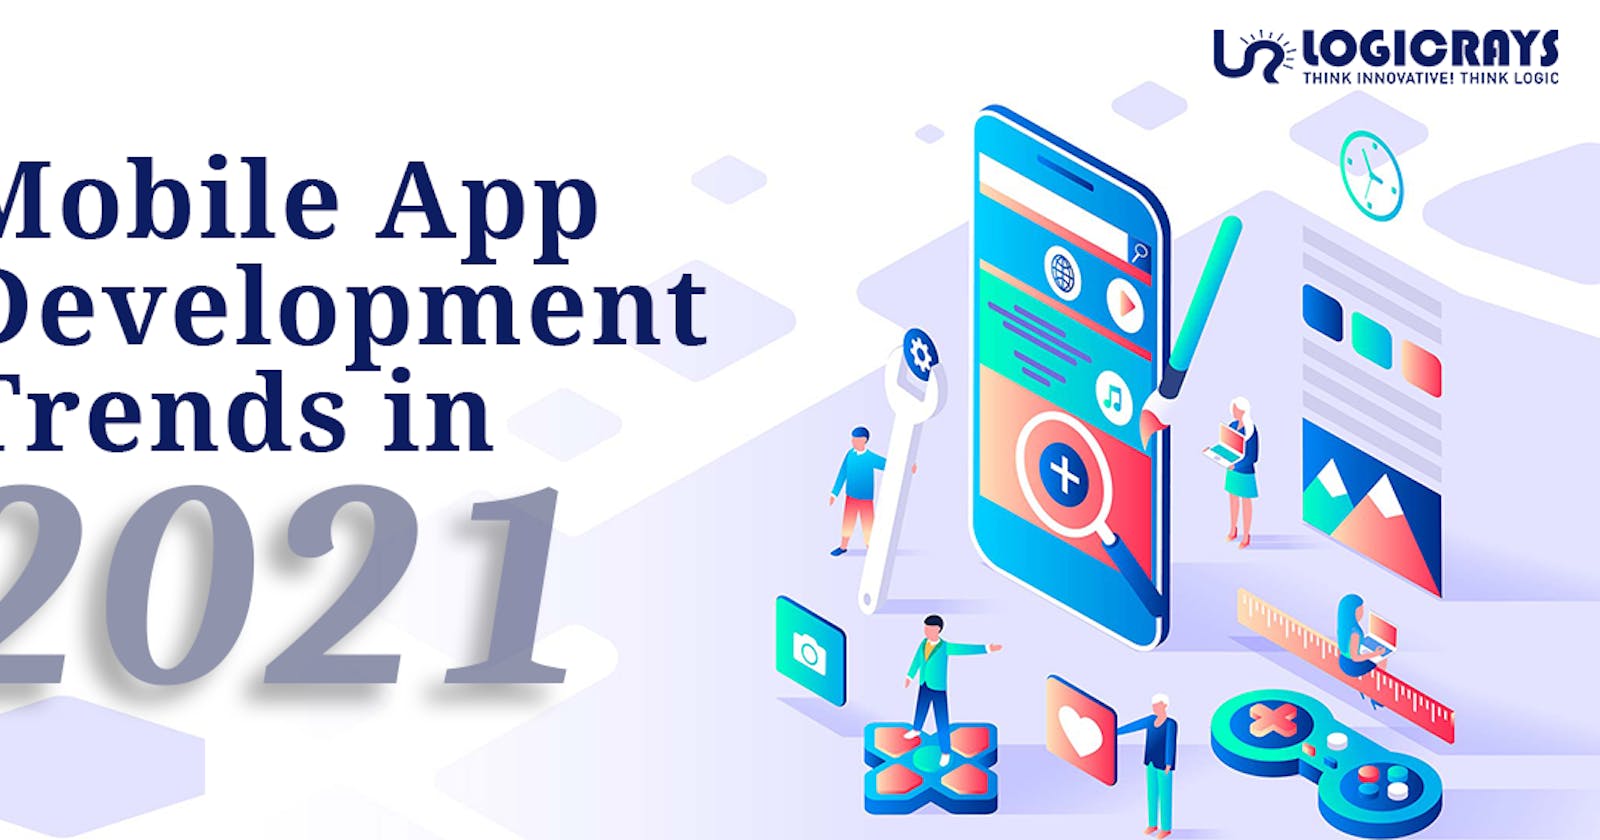 Top 10 Mobile App Development Trends To Watch Out For In 2021